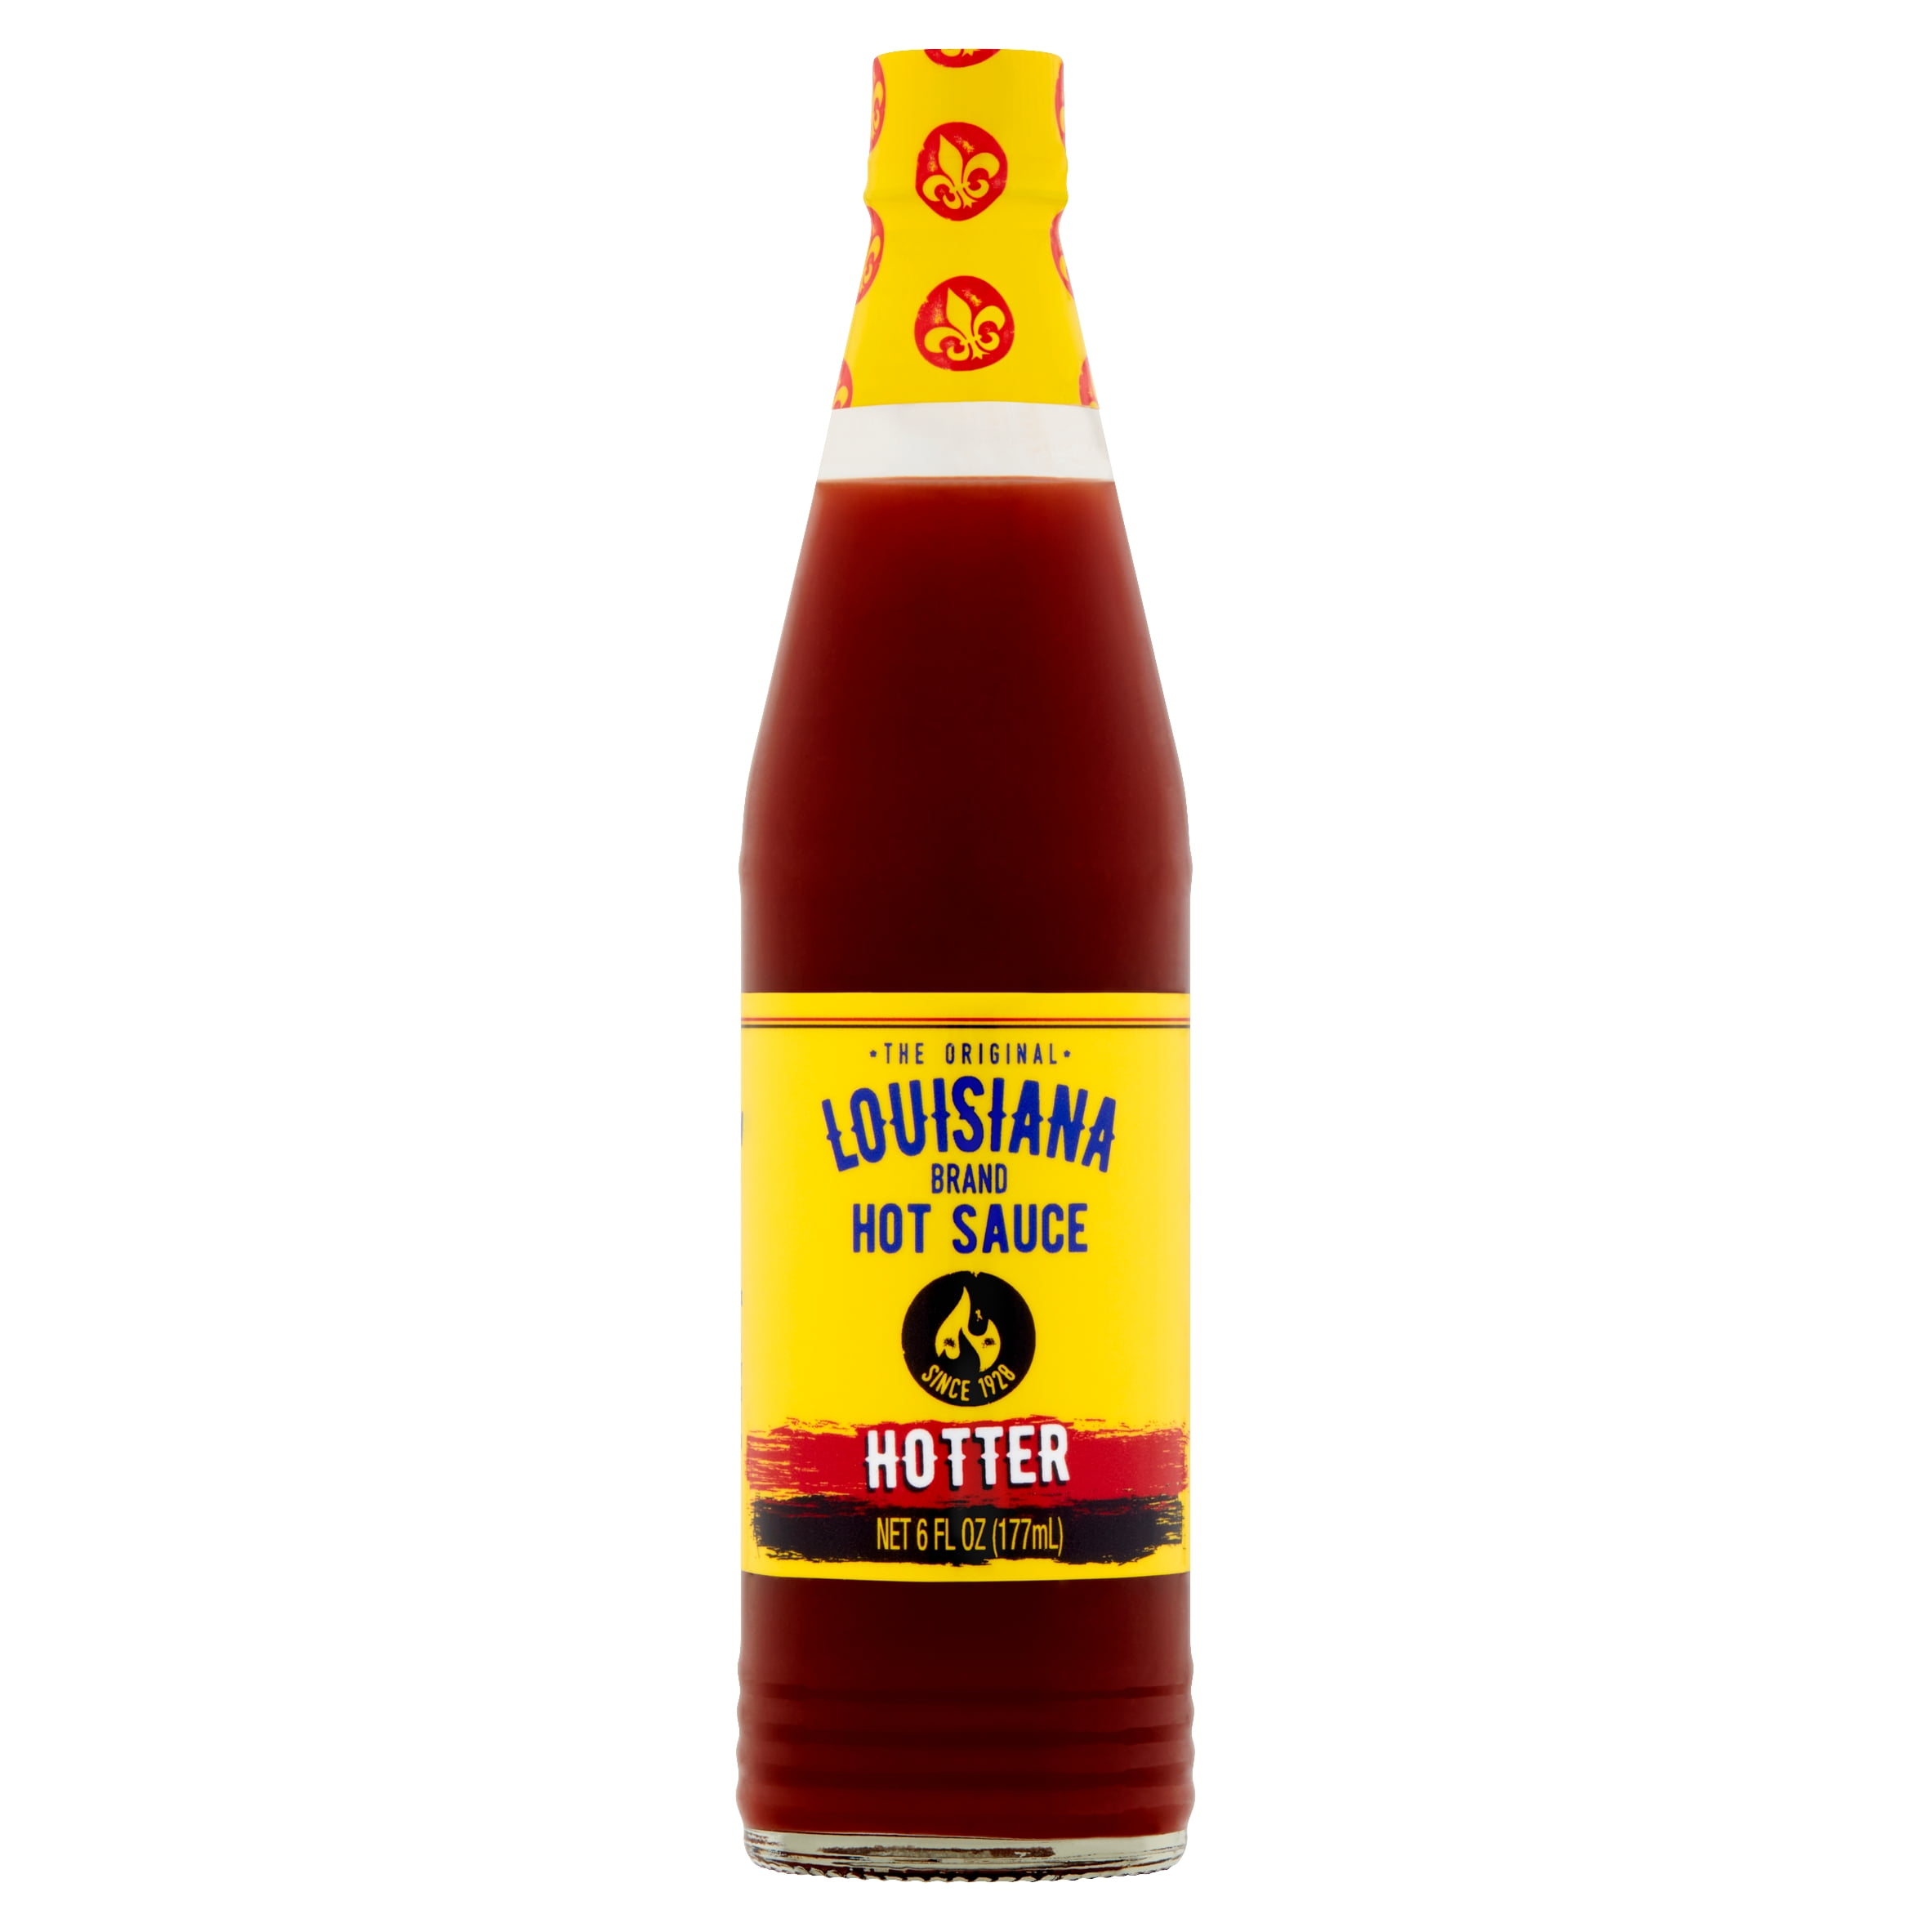 Buy Louisiana Brand The Original The Perfect Hot Sauce - it's vegetarian,  pescatarian, vegan , climate-friendly & plant-based